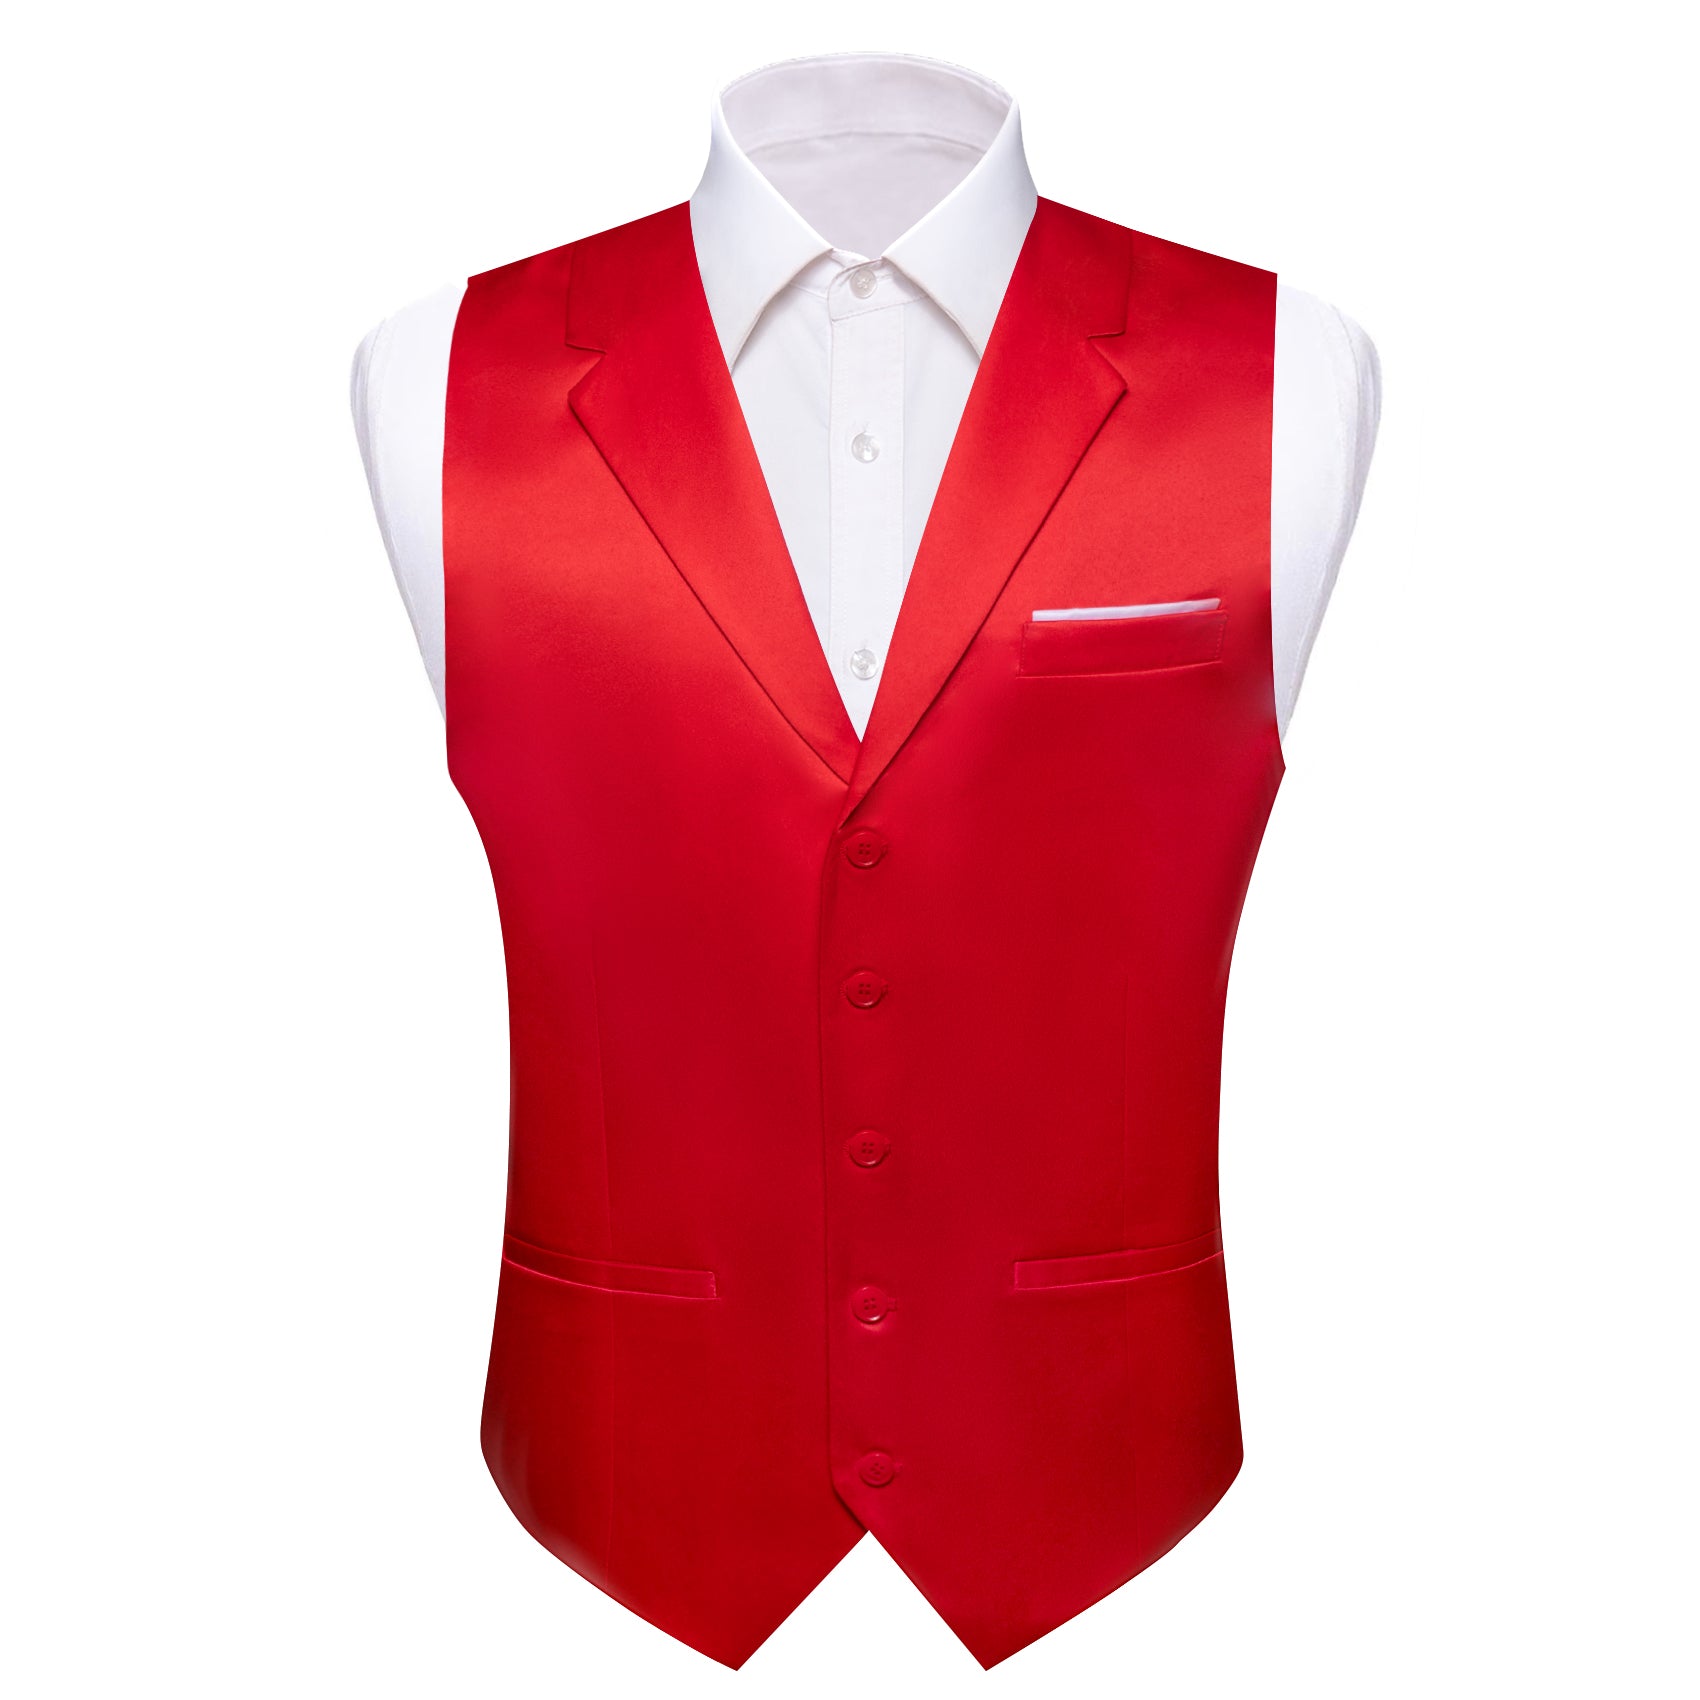 Barry.wang Red Solid Vest Waistcoat Set